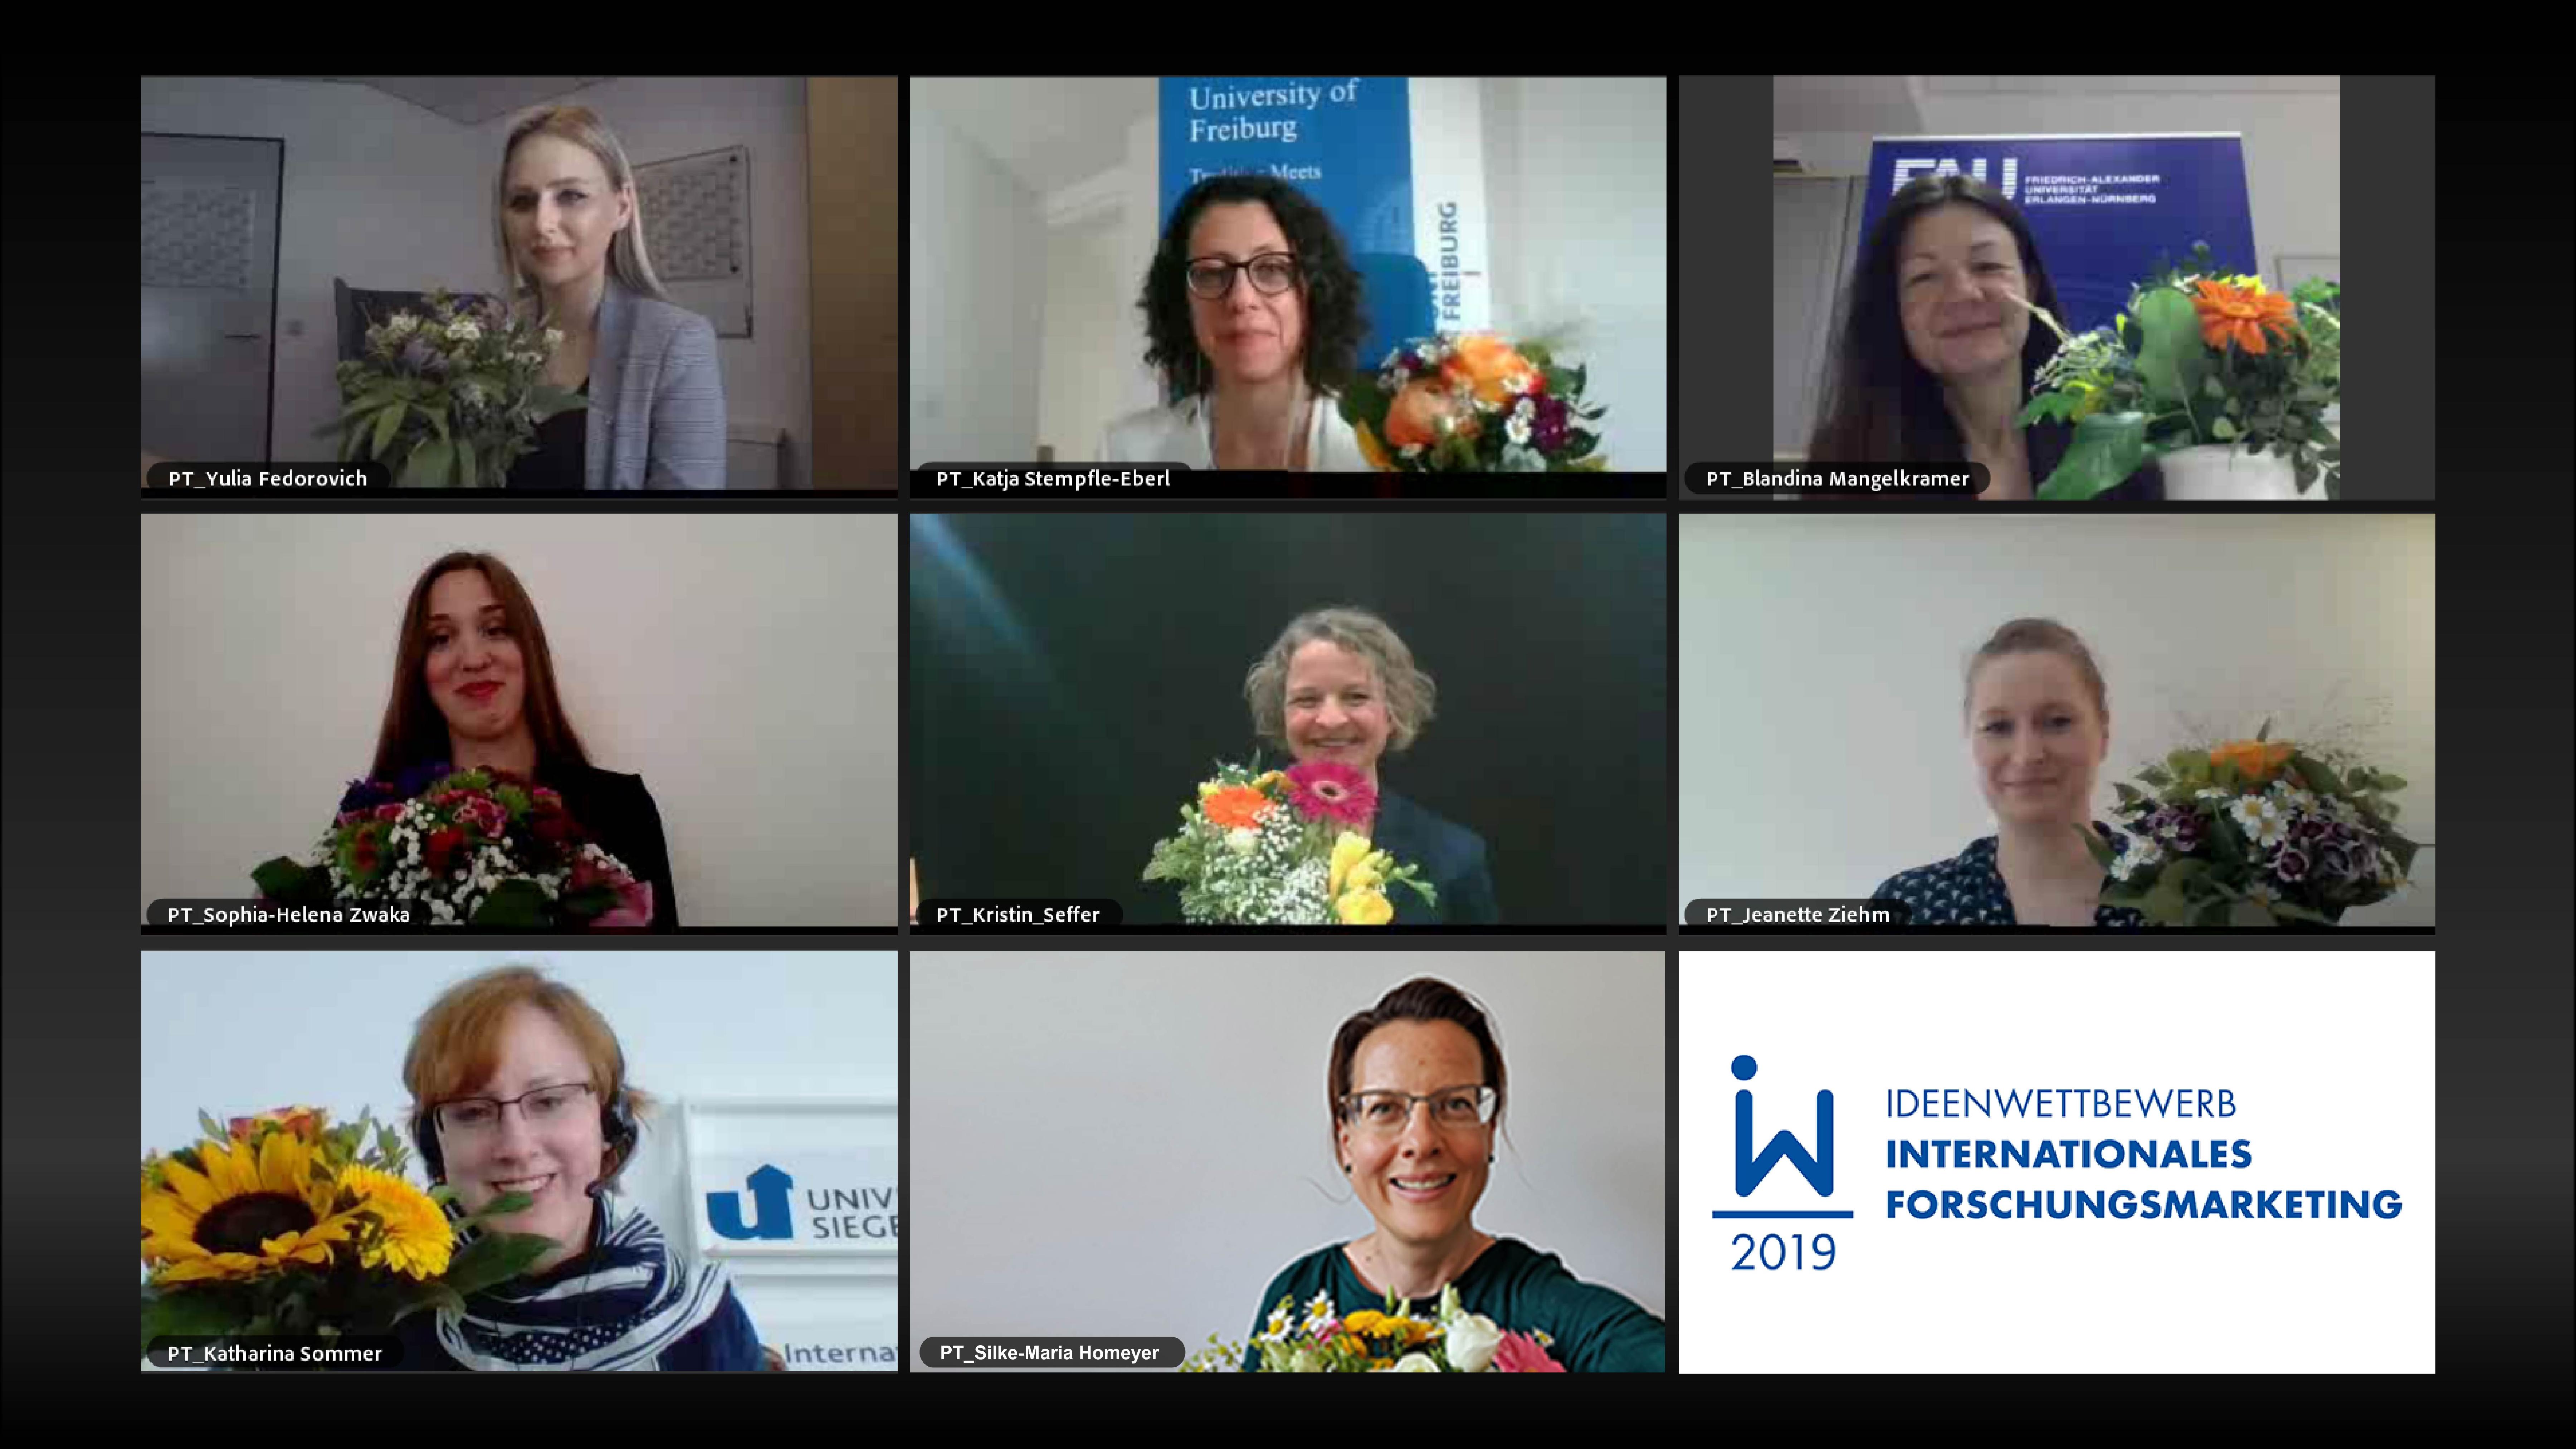 Presentation of flowers – held virtually due to the COVID-19 pandemic – to the winners of the 2019 International Research Marketing ideas competition